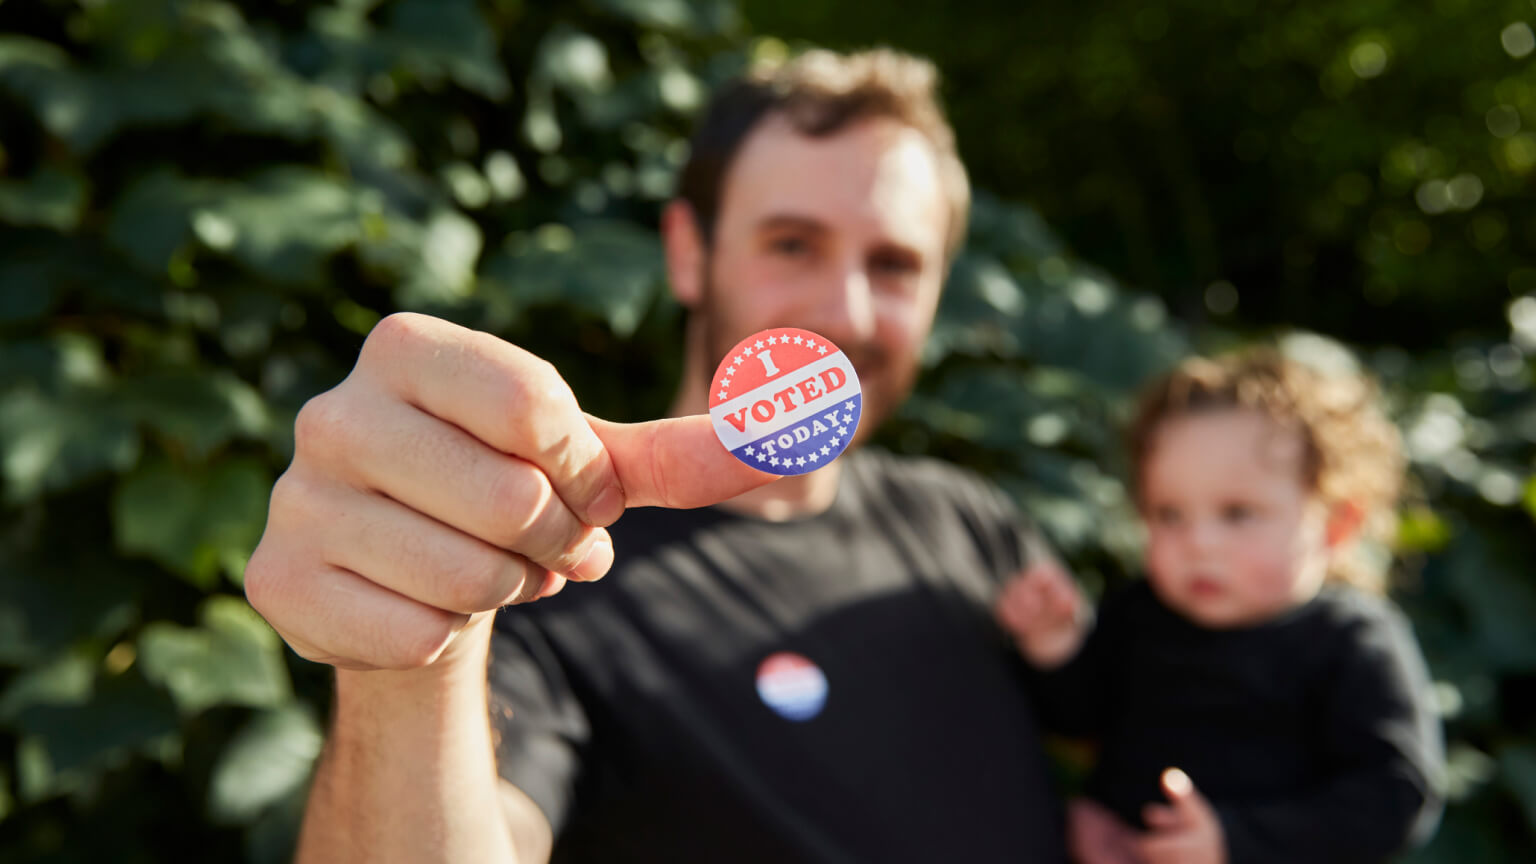 A father standing outside holding his baby, with an "I Voted Sticker" on his thumb